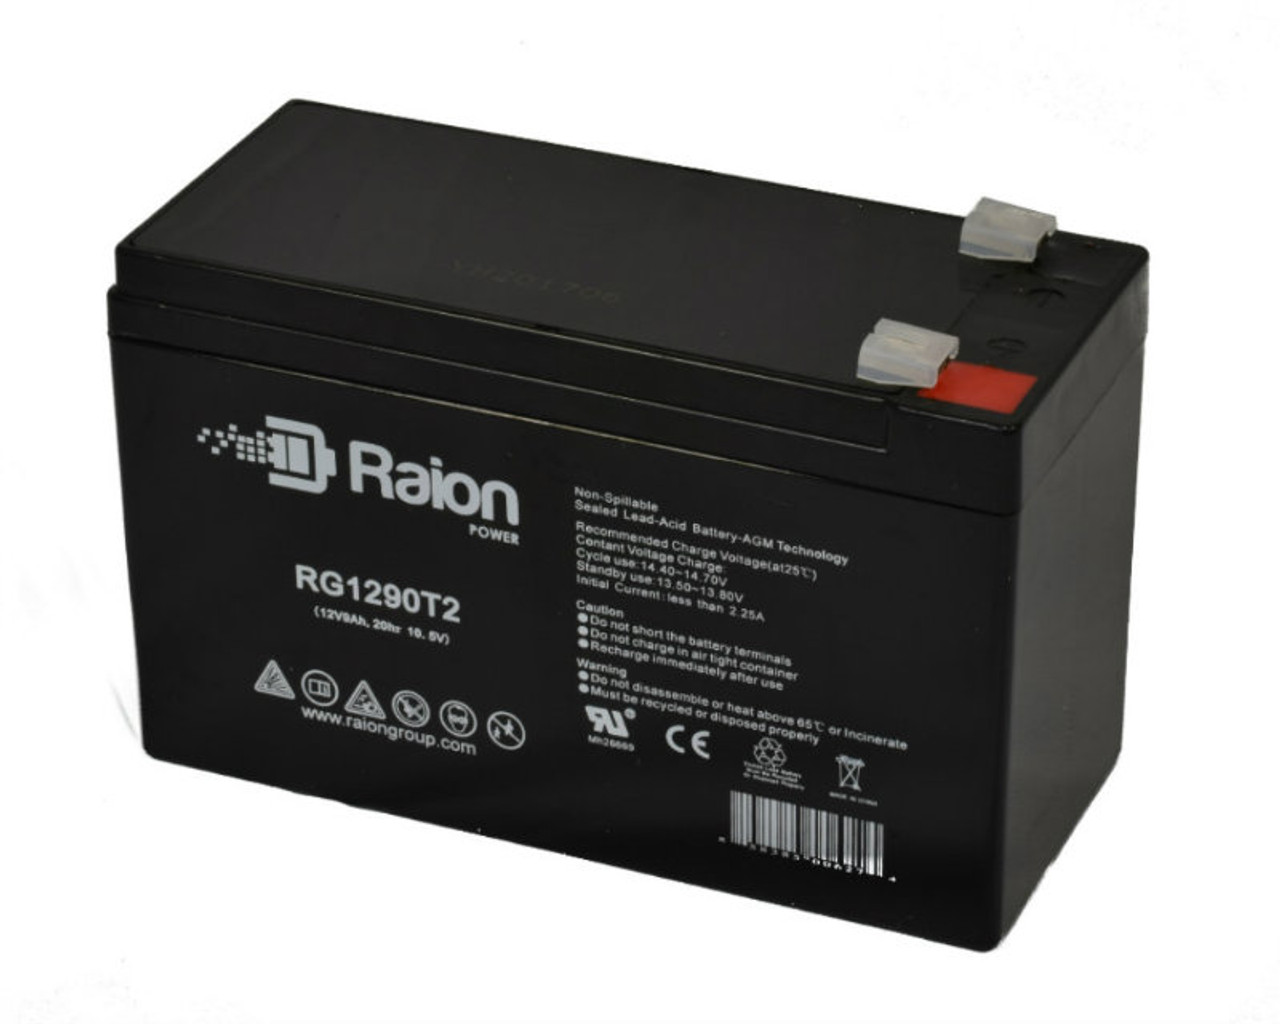 Raion Power Replacement 12V 9Ah Battery for SEC 12-MP-9.0 - 1 Pack